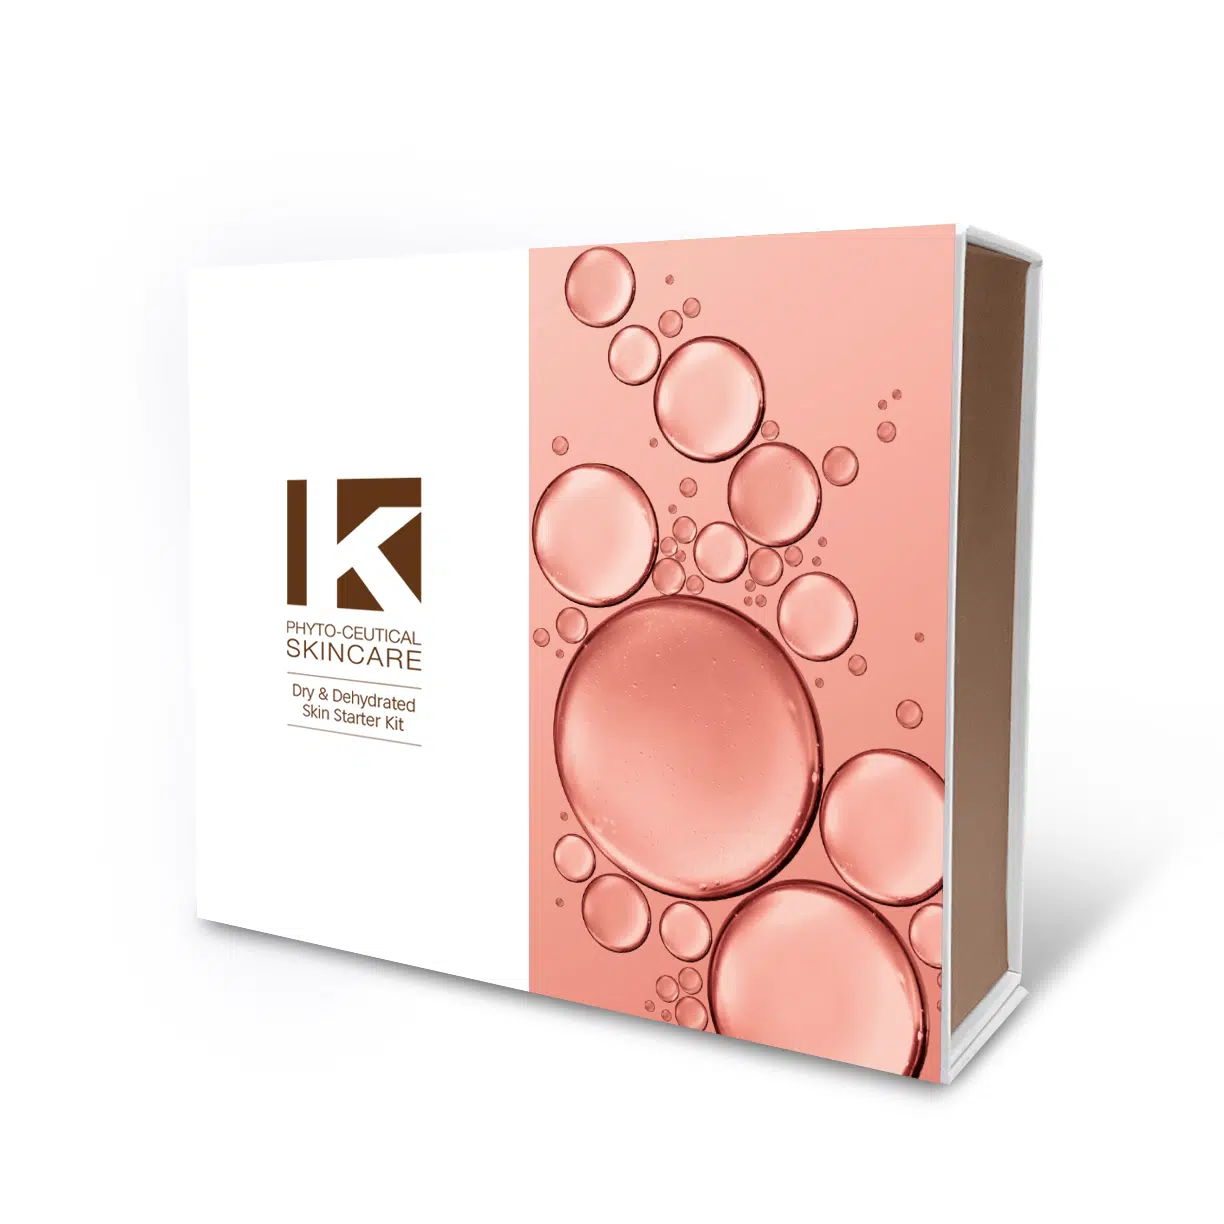 K Phyto-Ceutical Skincare - Dry & Dehydrated Kit